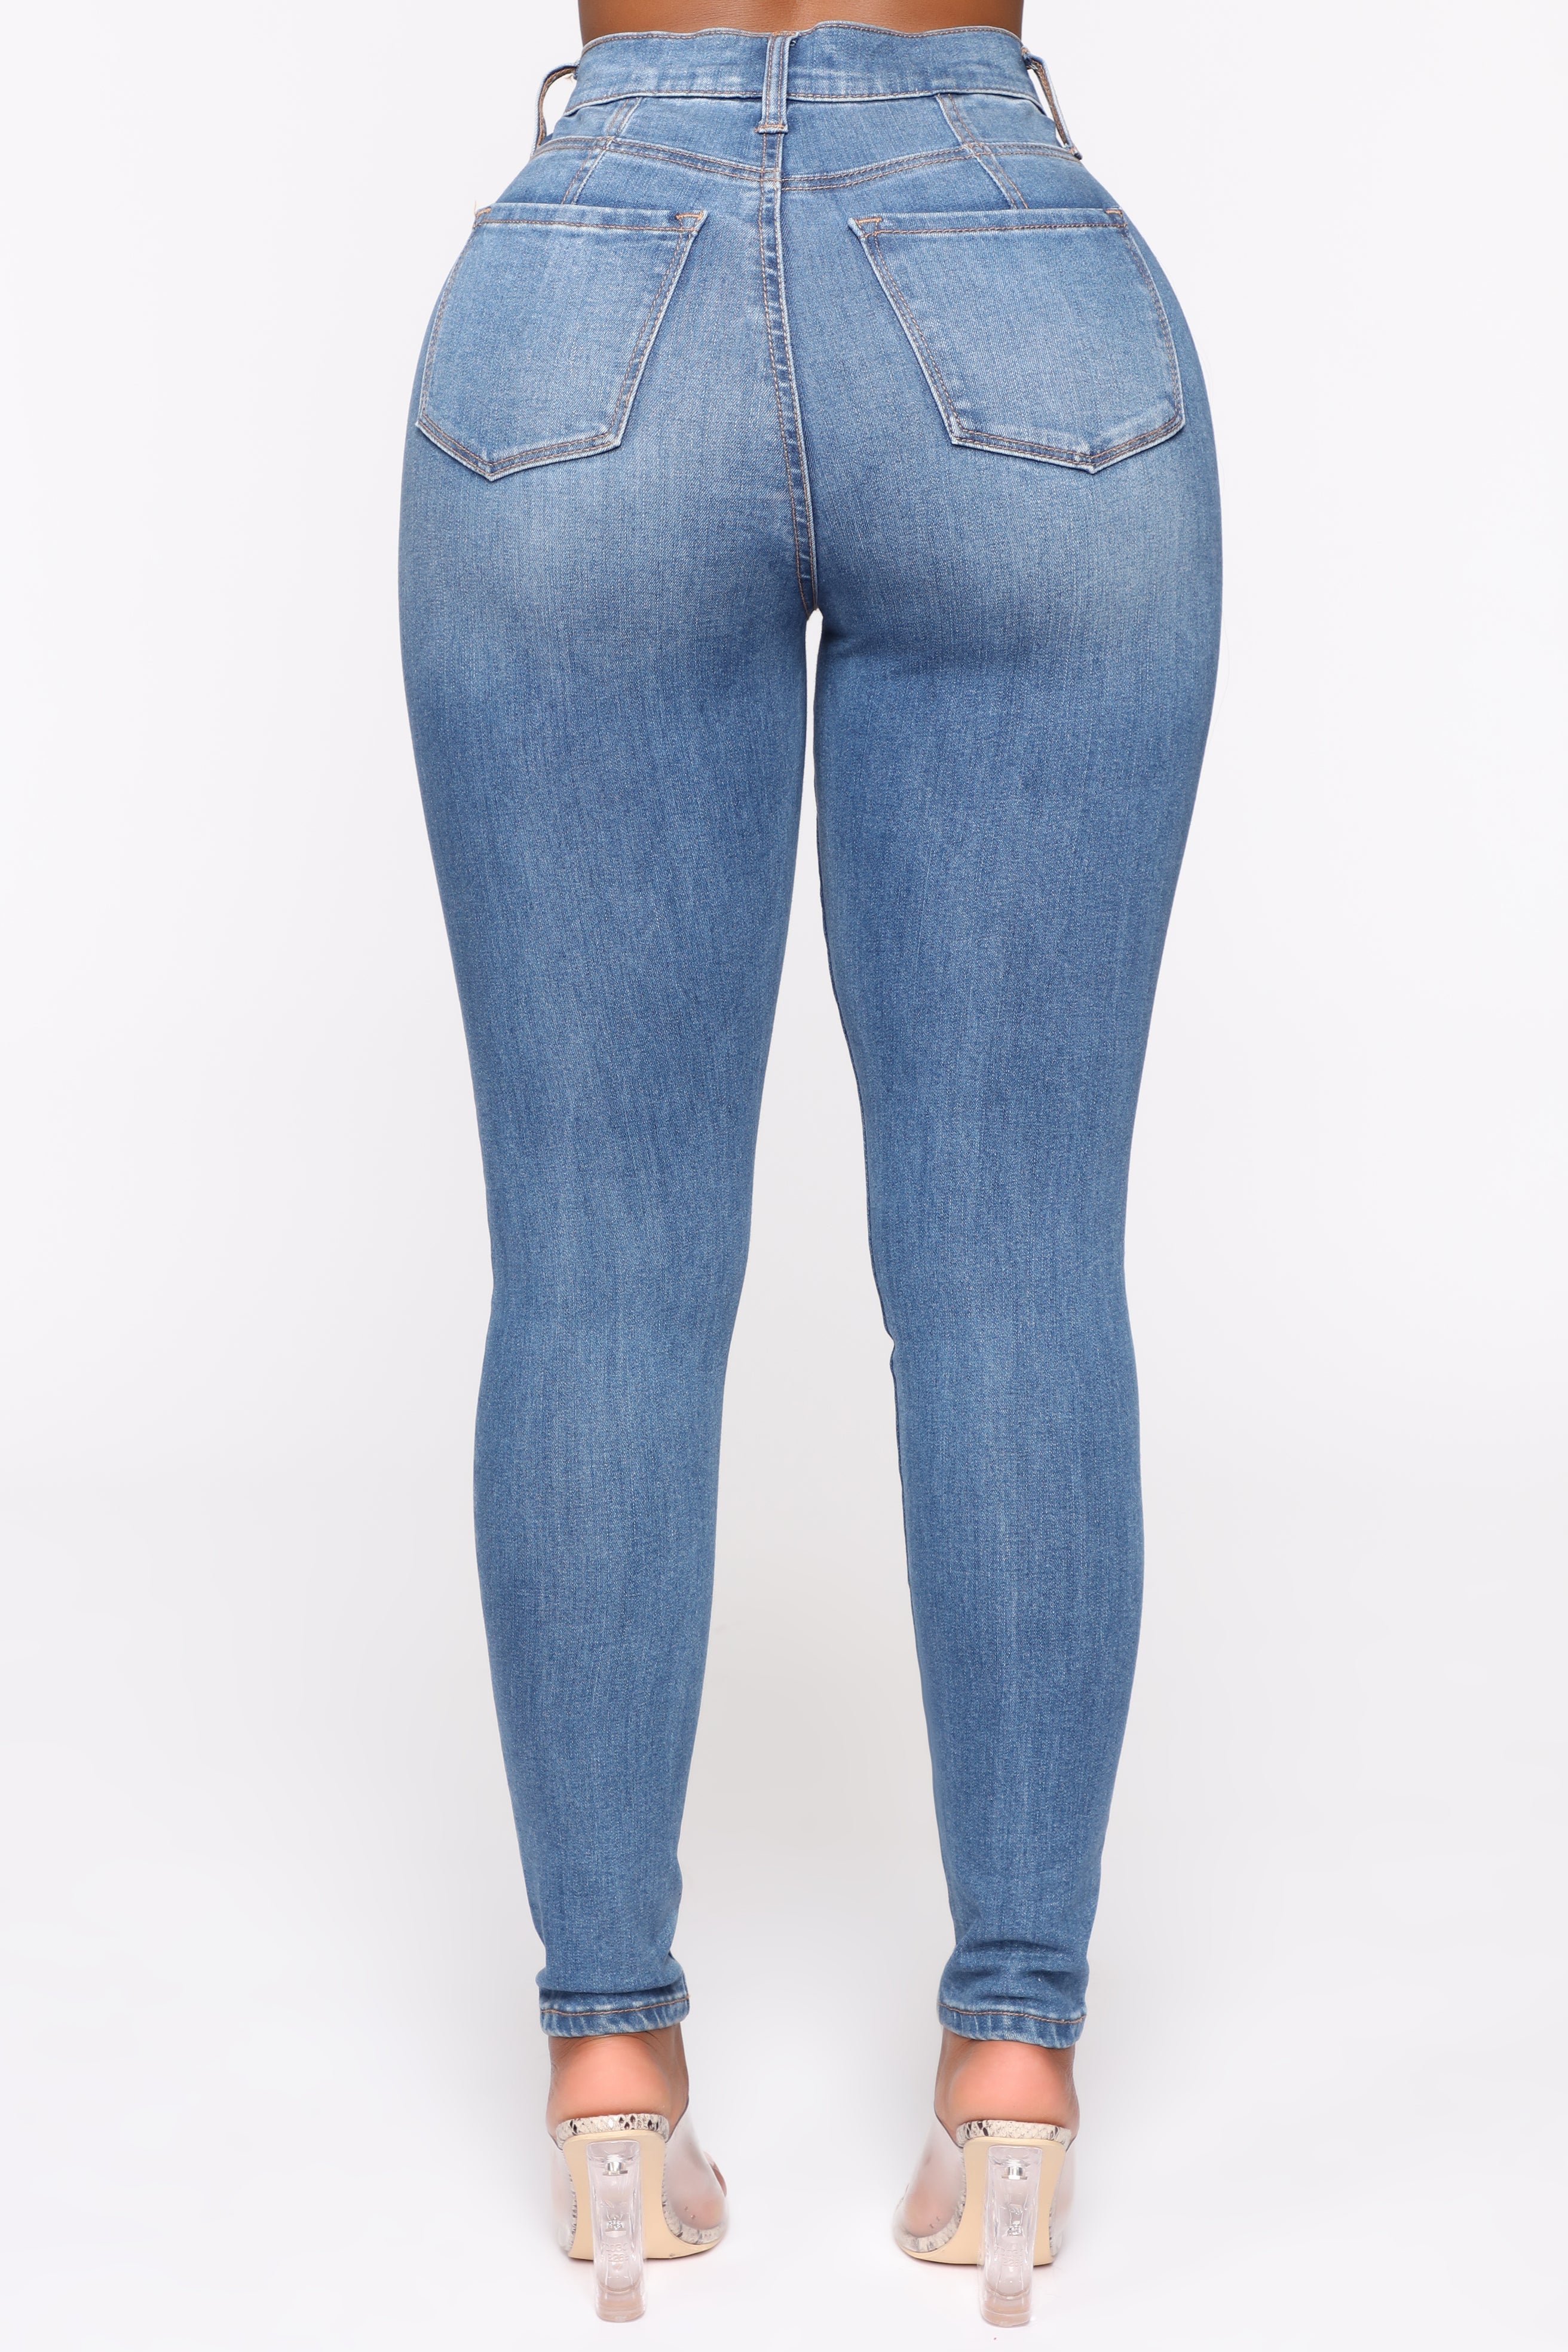 Our Favorite High Rise Skinny Jeans - Medium Blue Wash – VP Clothes